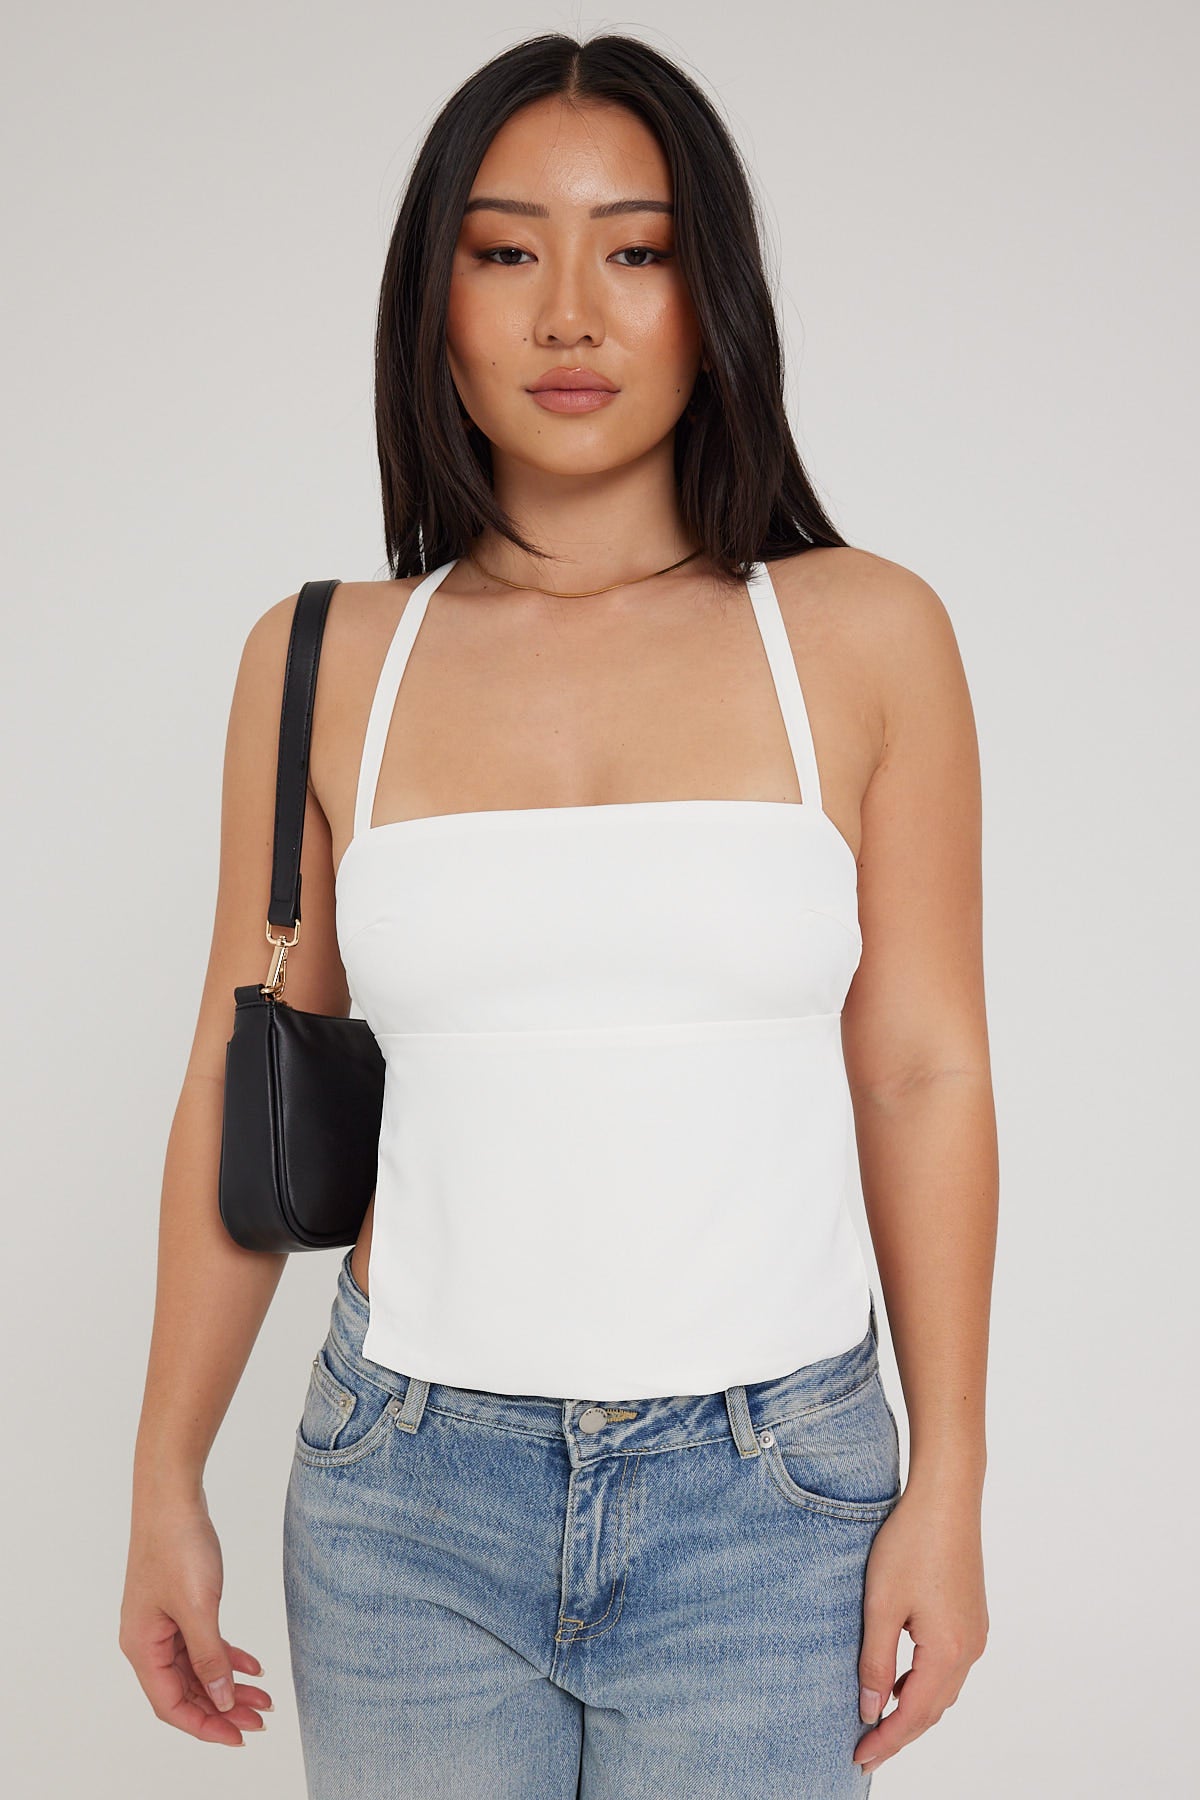 Perfect Stranger Lace Up Back Tie Top White